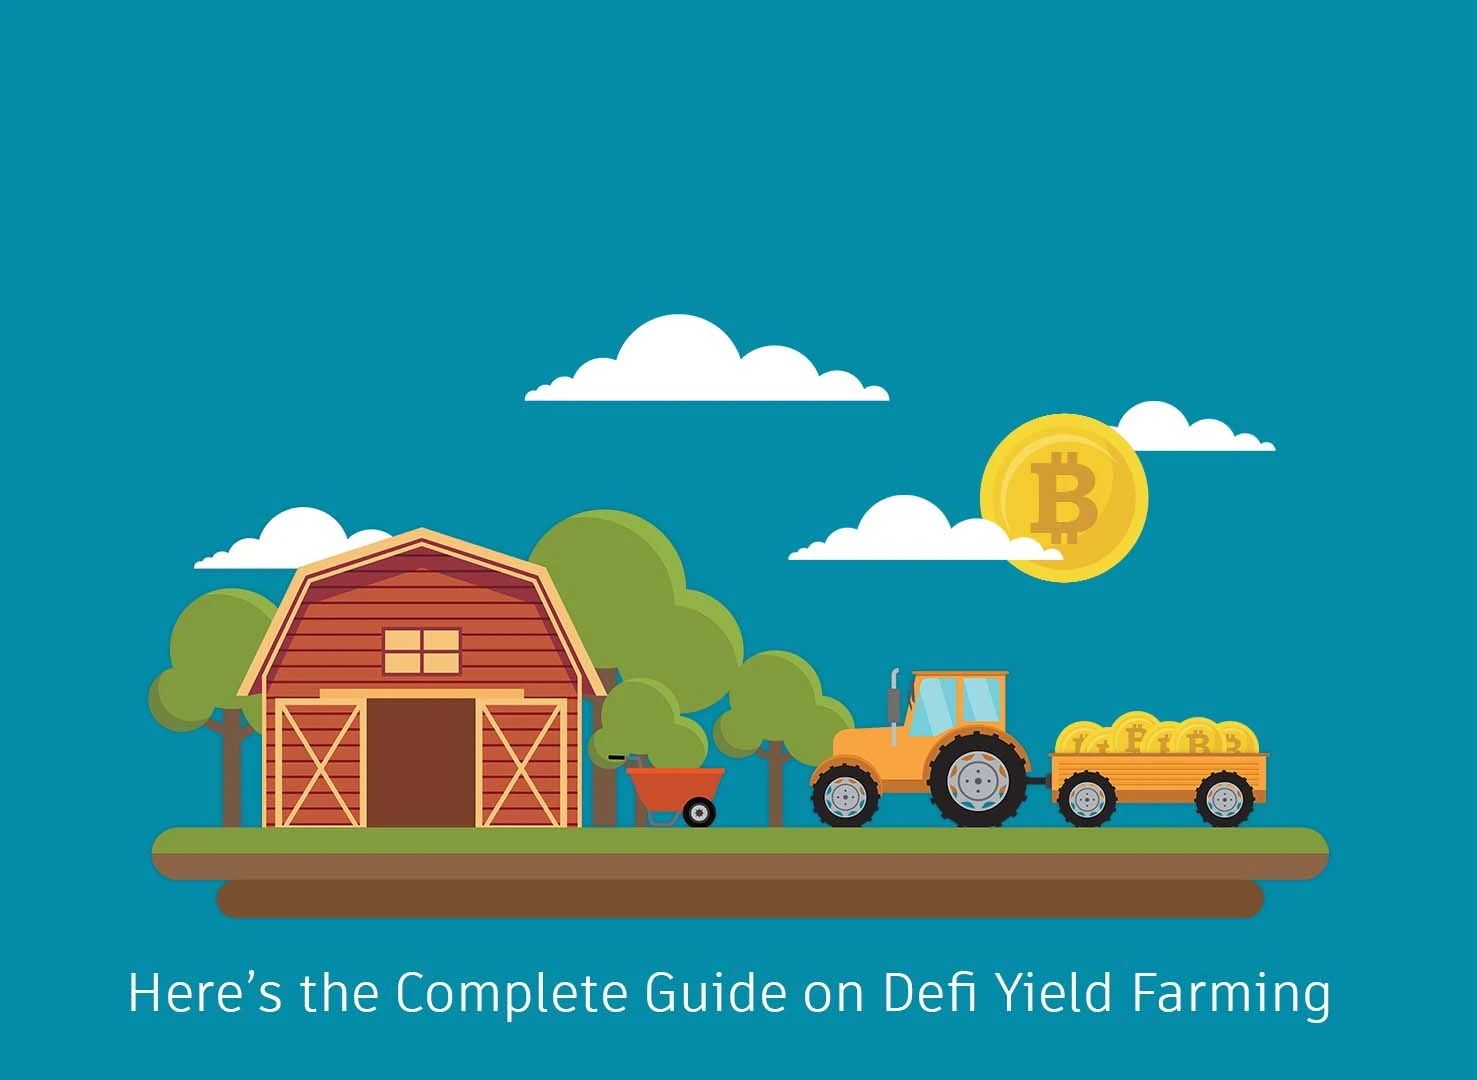 Here’s the Complete Guide on Defi Yield Farming